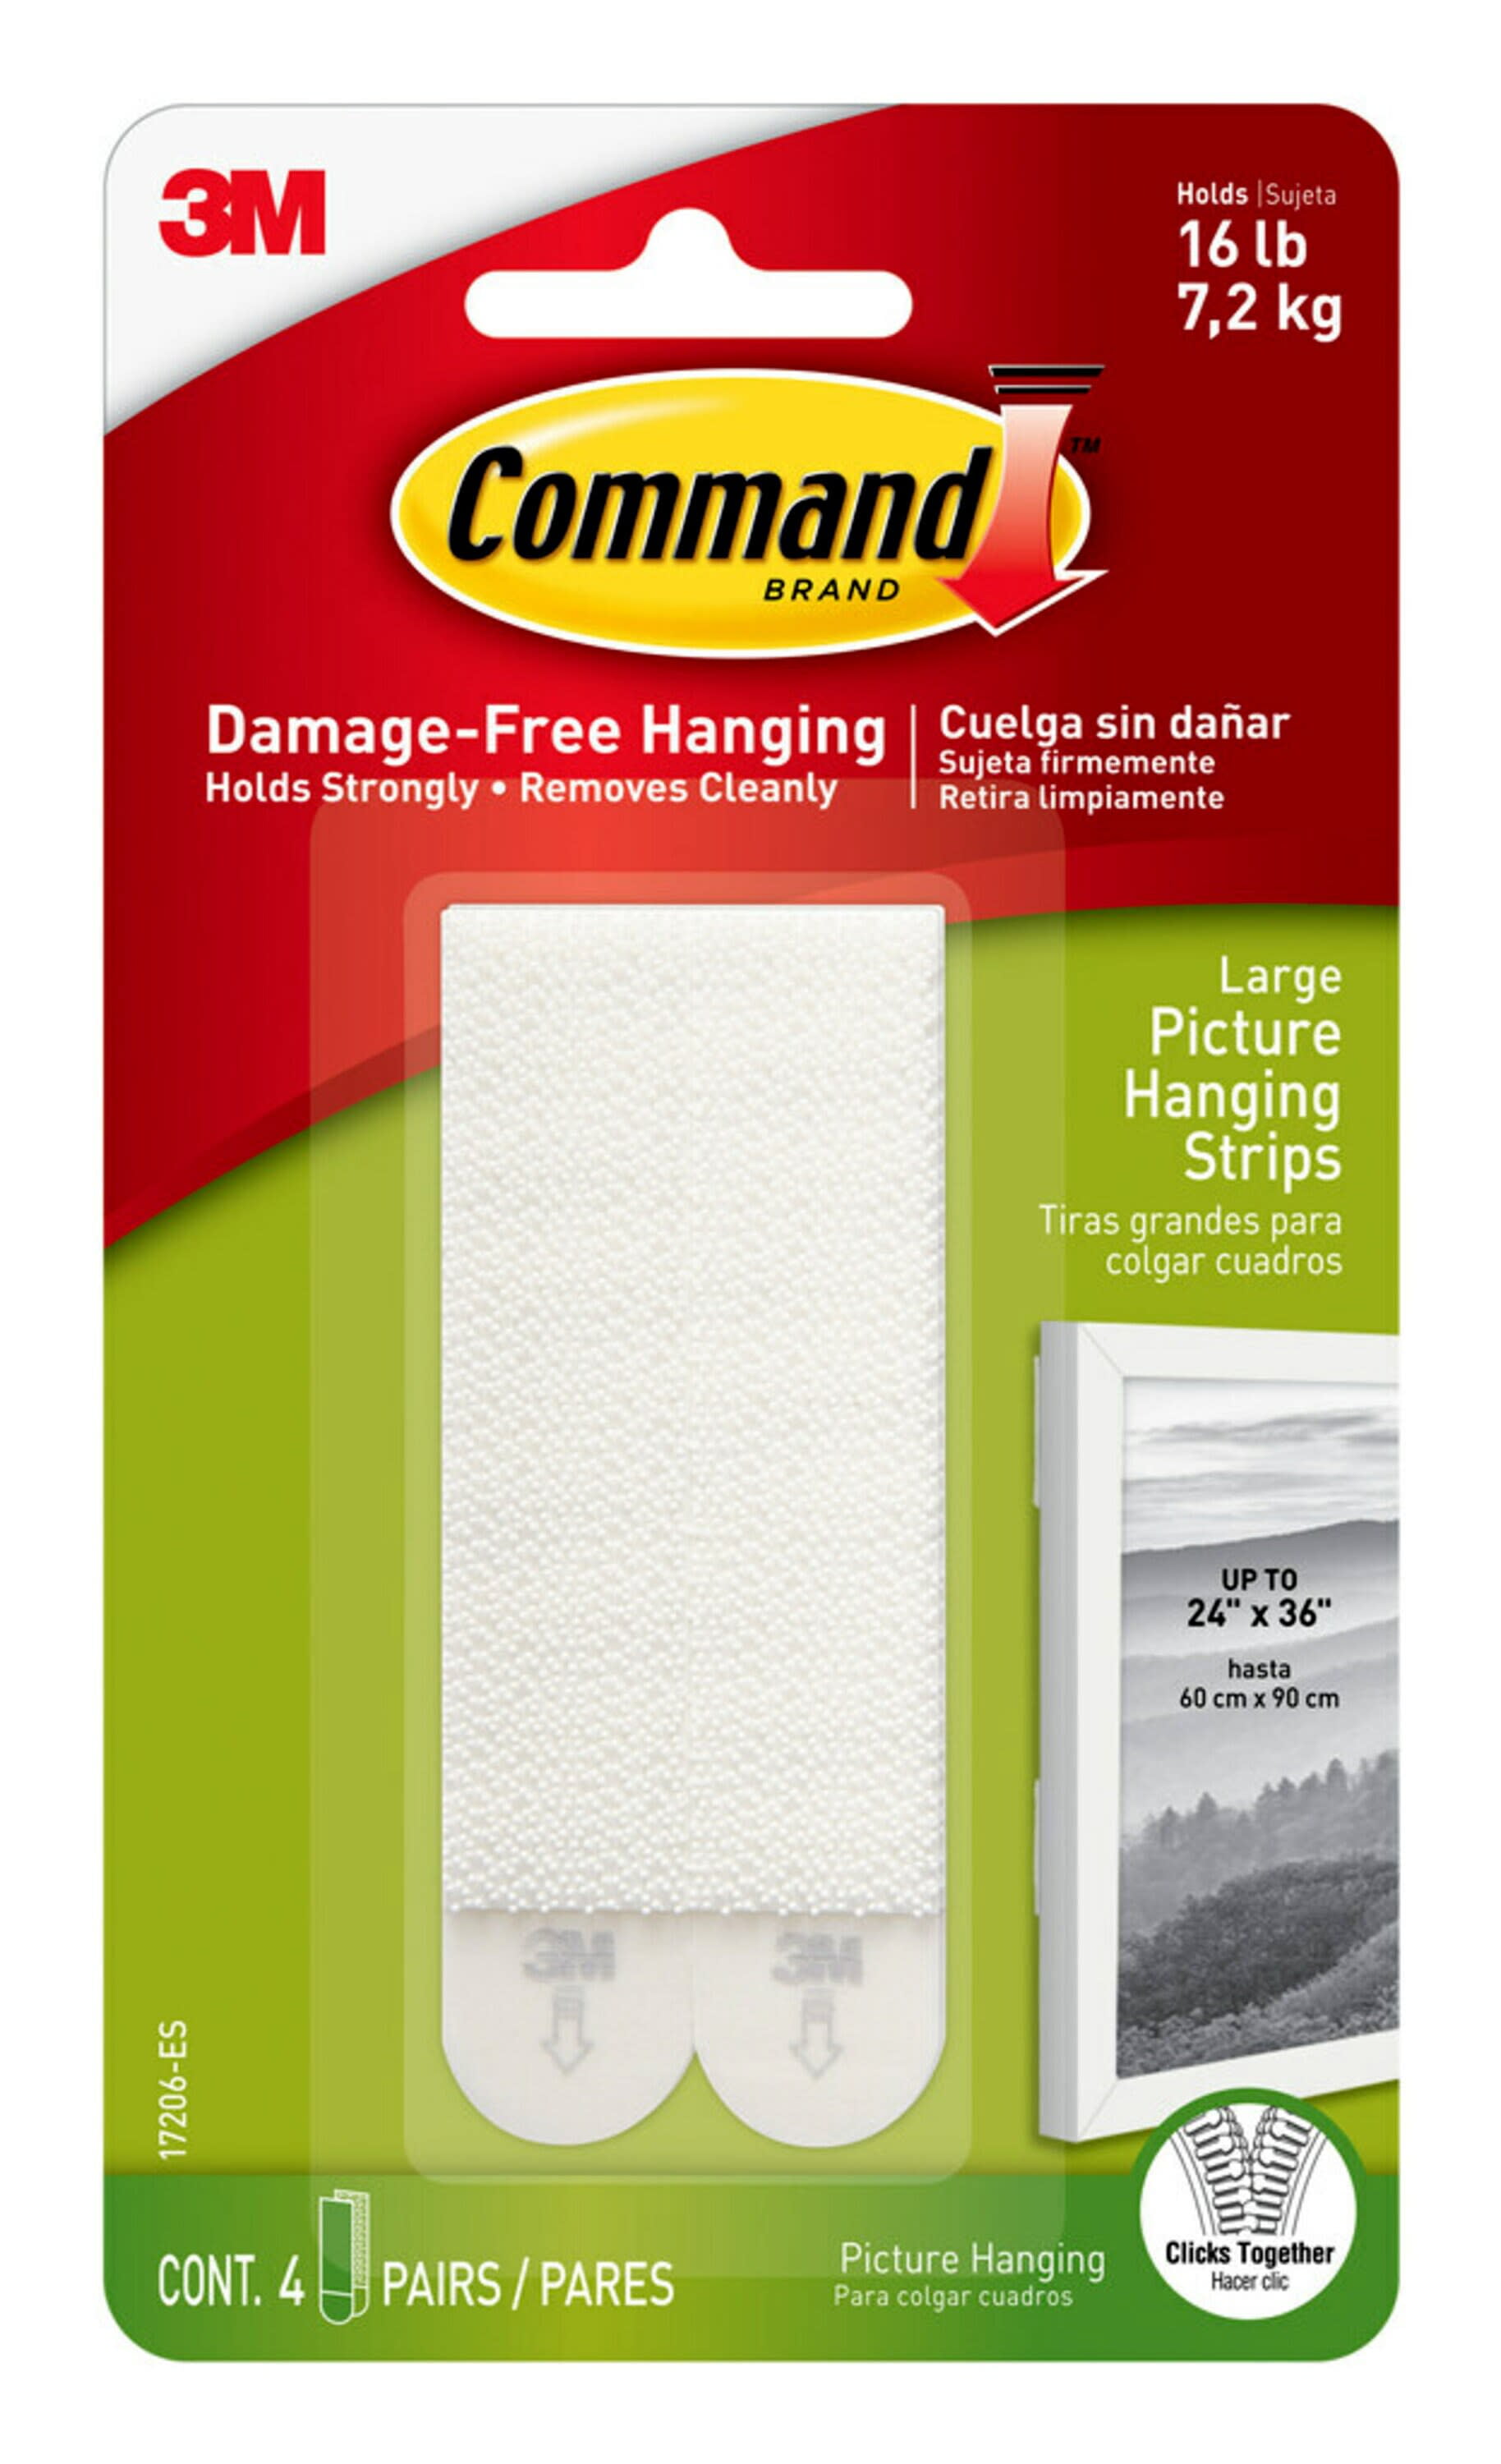 Hold 16lbs 30 Pairs 60 Strips 3M Command Large Picture Hanging Strips 